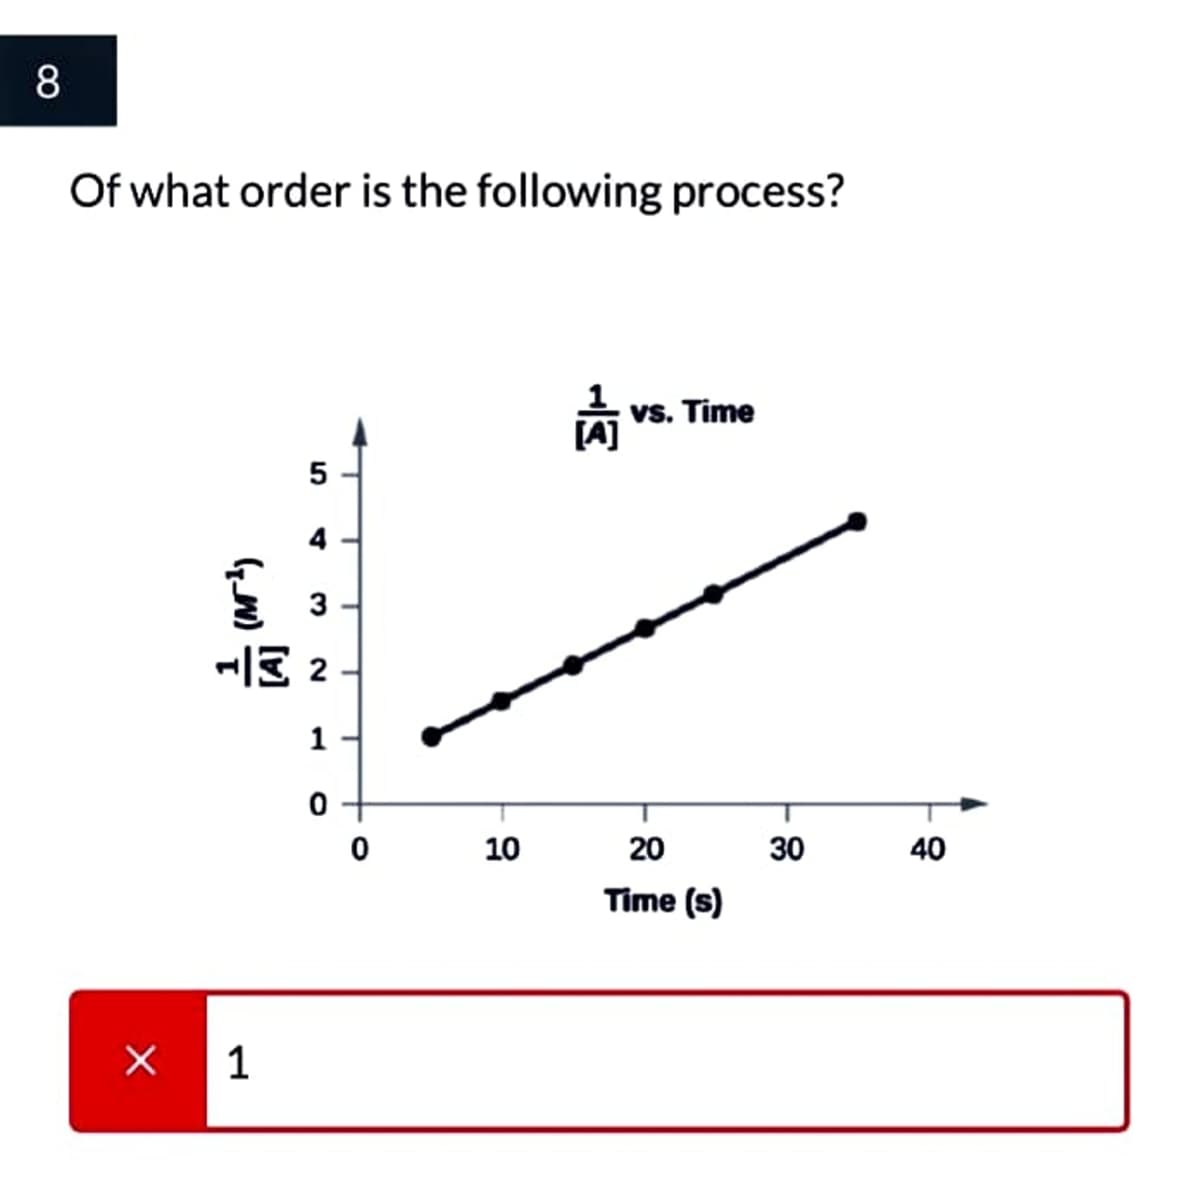 8
Of what order is the following process?
向
vs. Time
4
3
1
10
20
30
40
Time (s)
1
